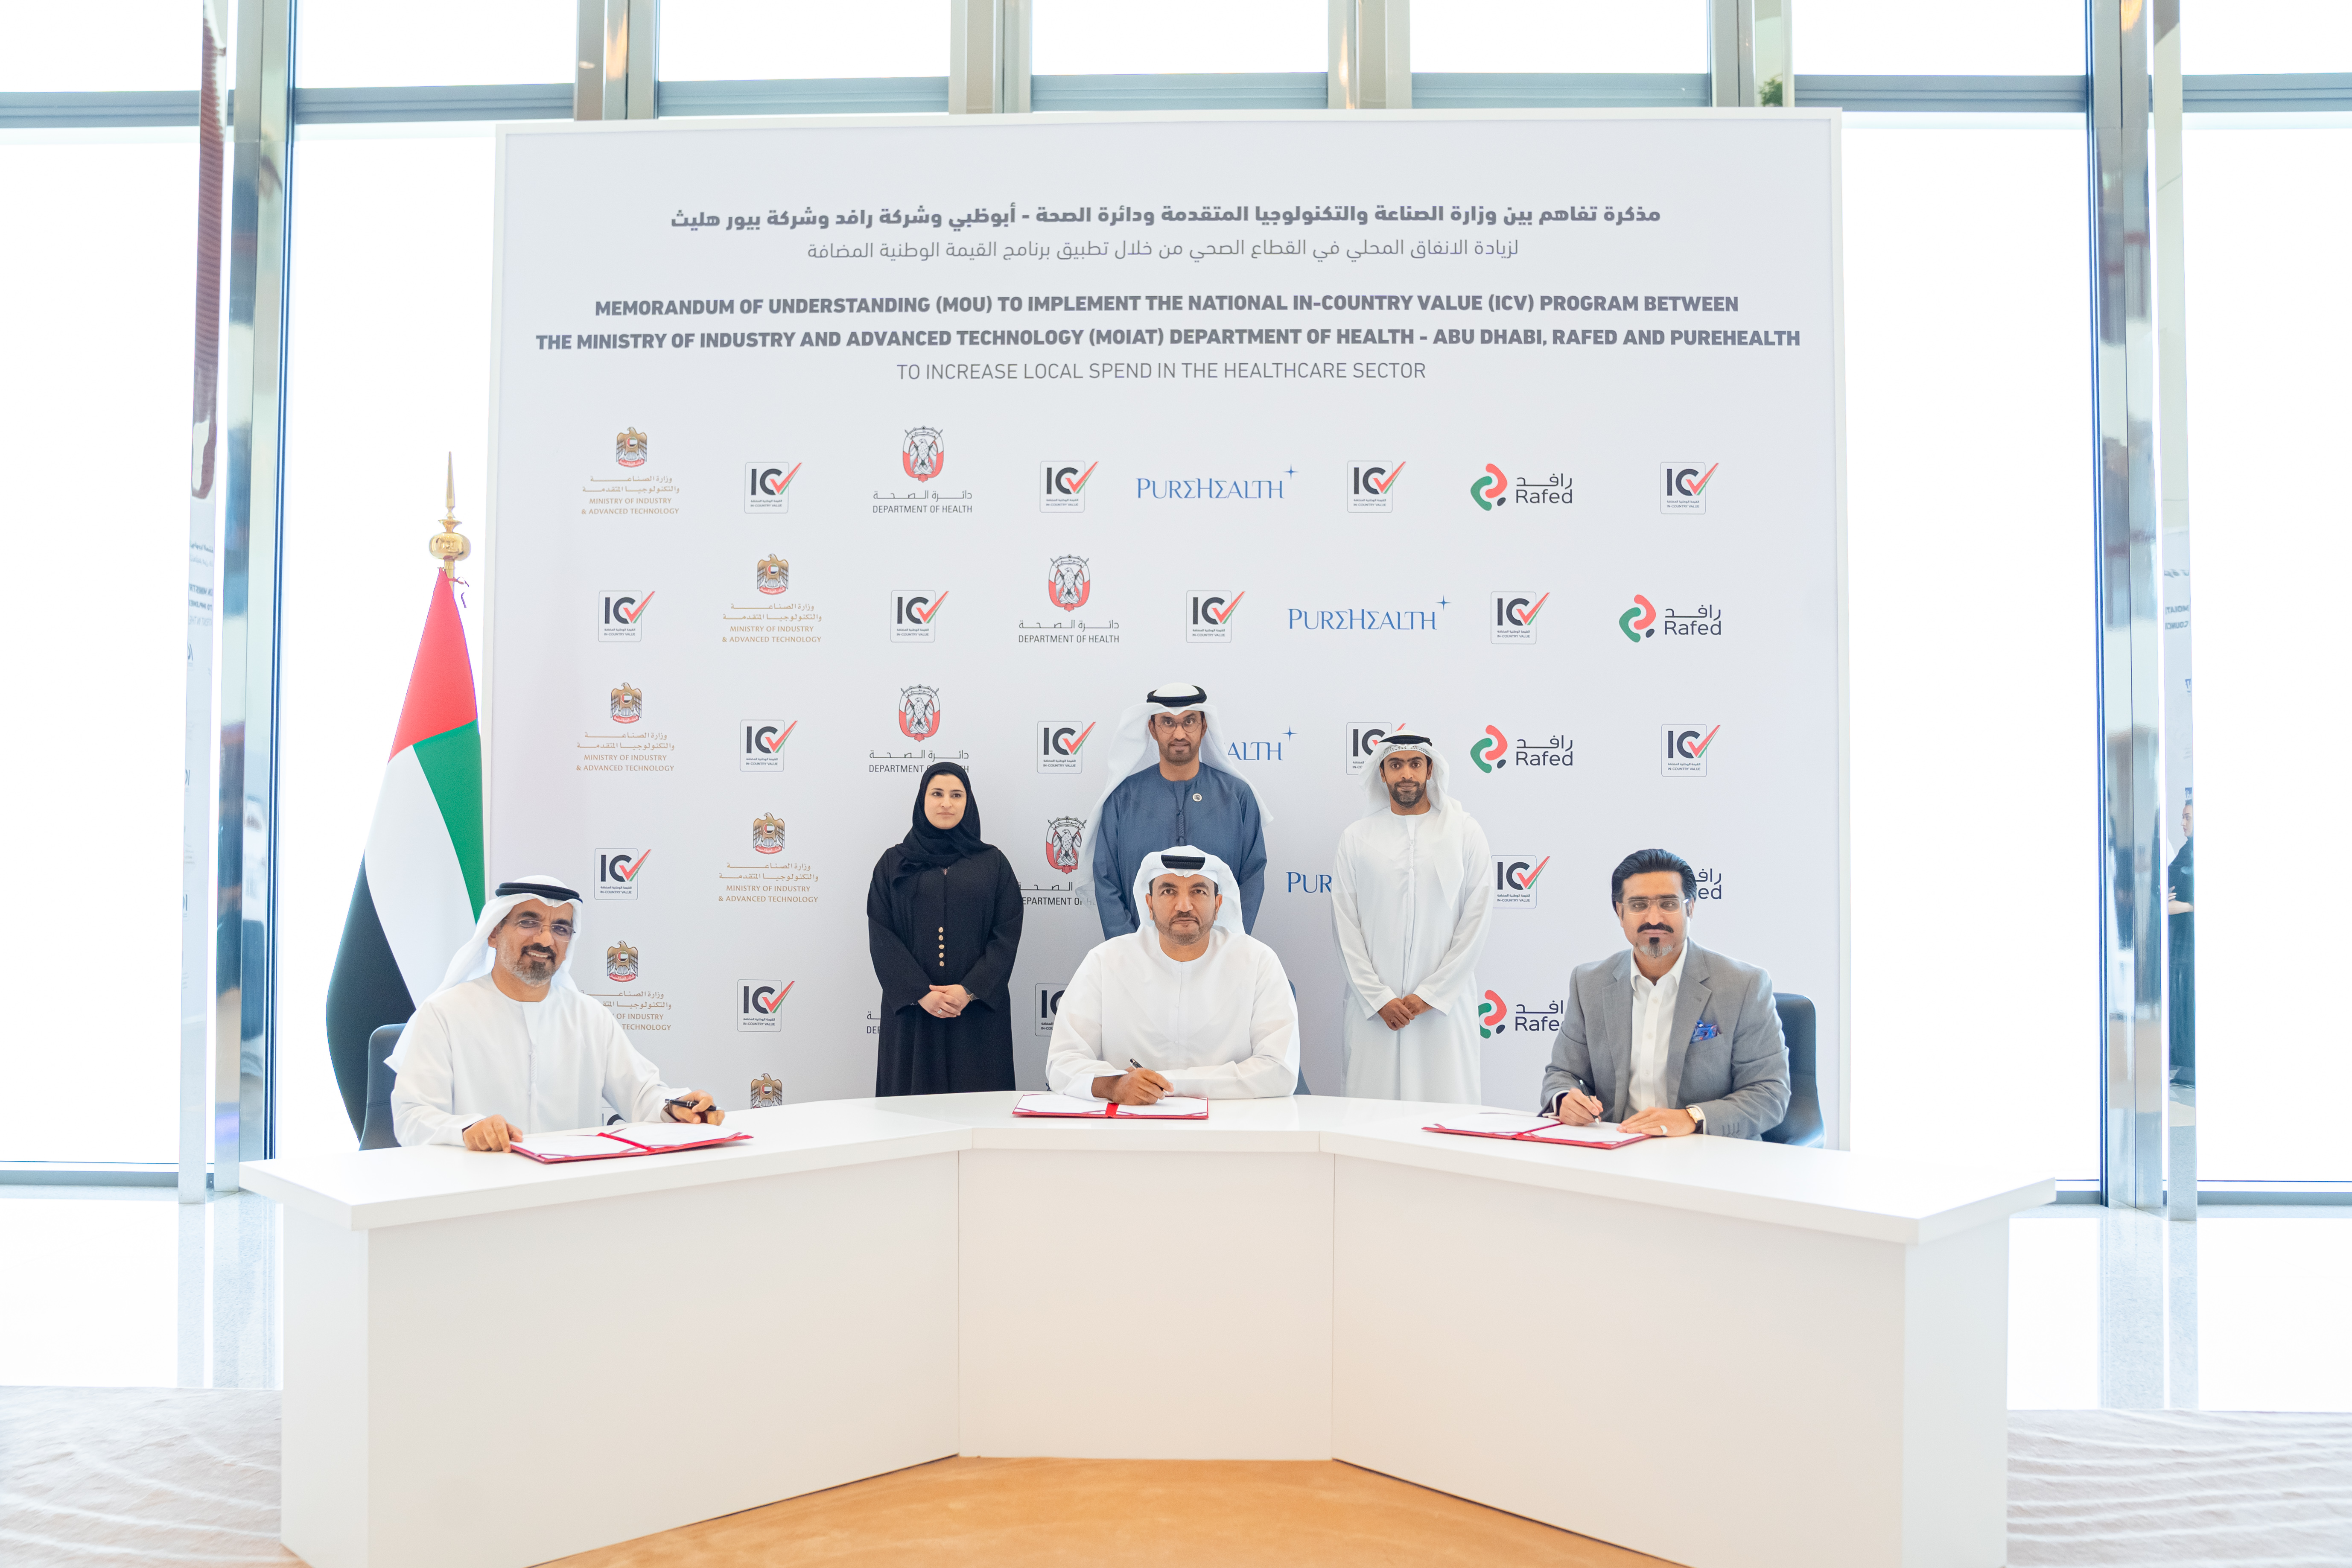 Department of Health Abu Dhabi, Rafed and Pure Health join The National In Country Value program